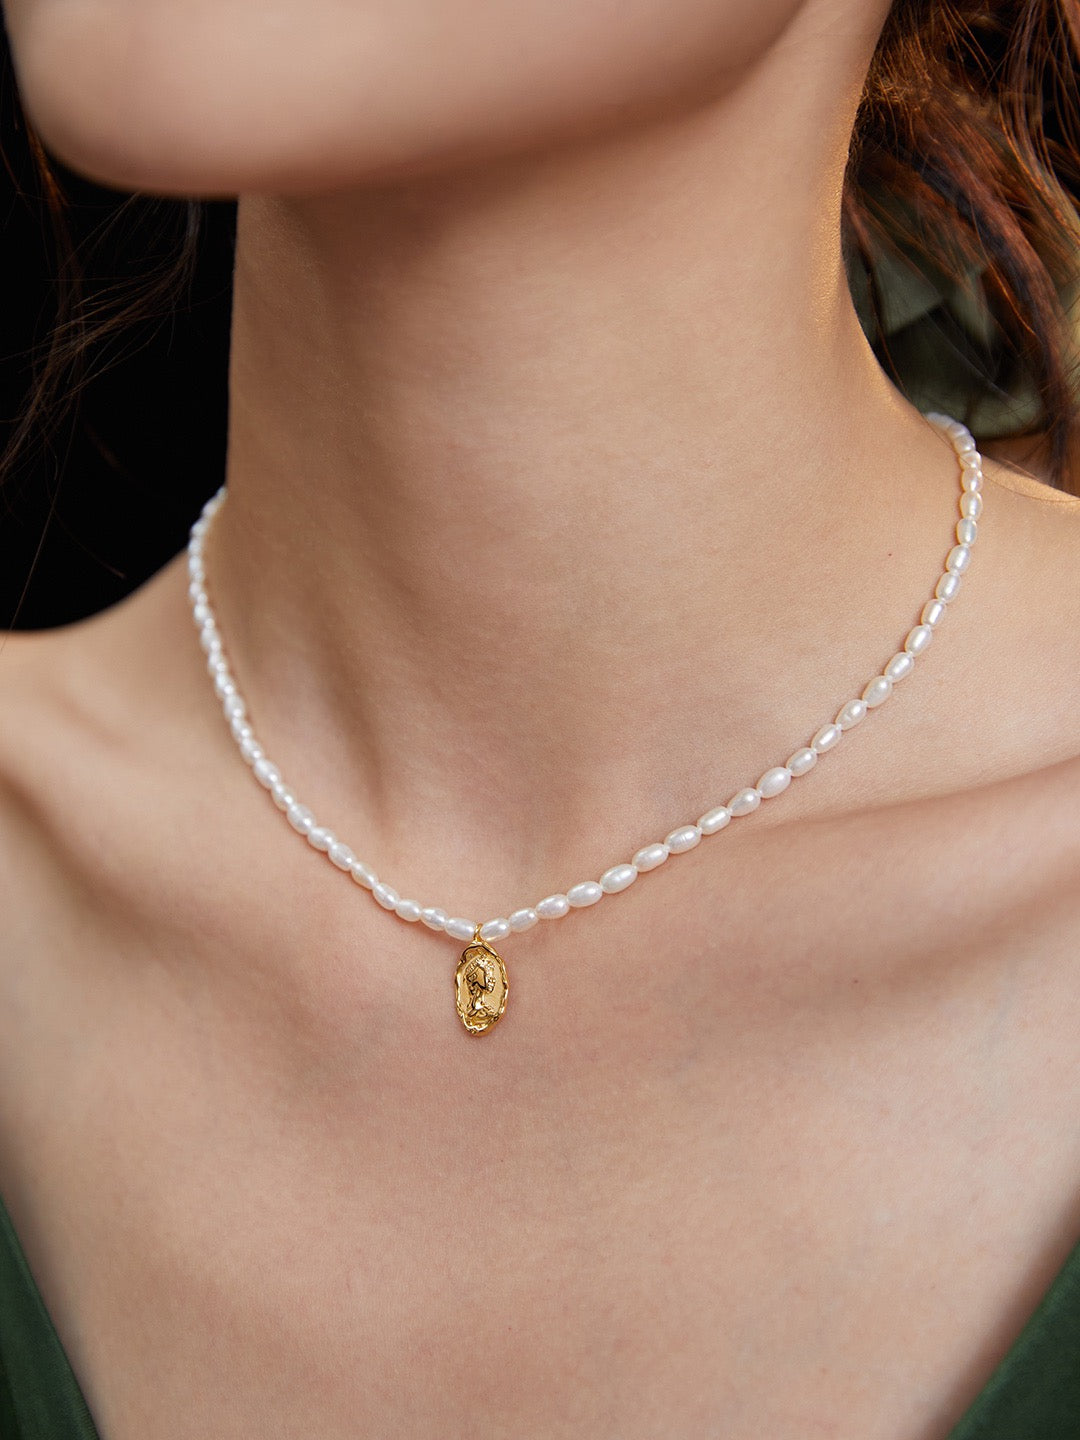 Golden pendant pearl clavicle necklace